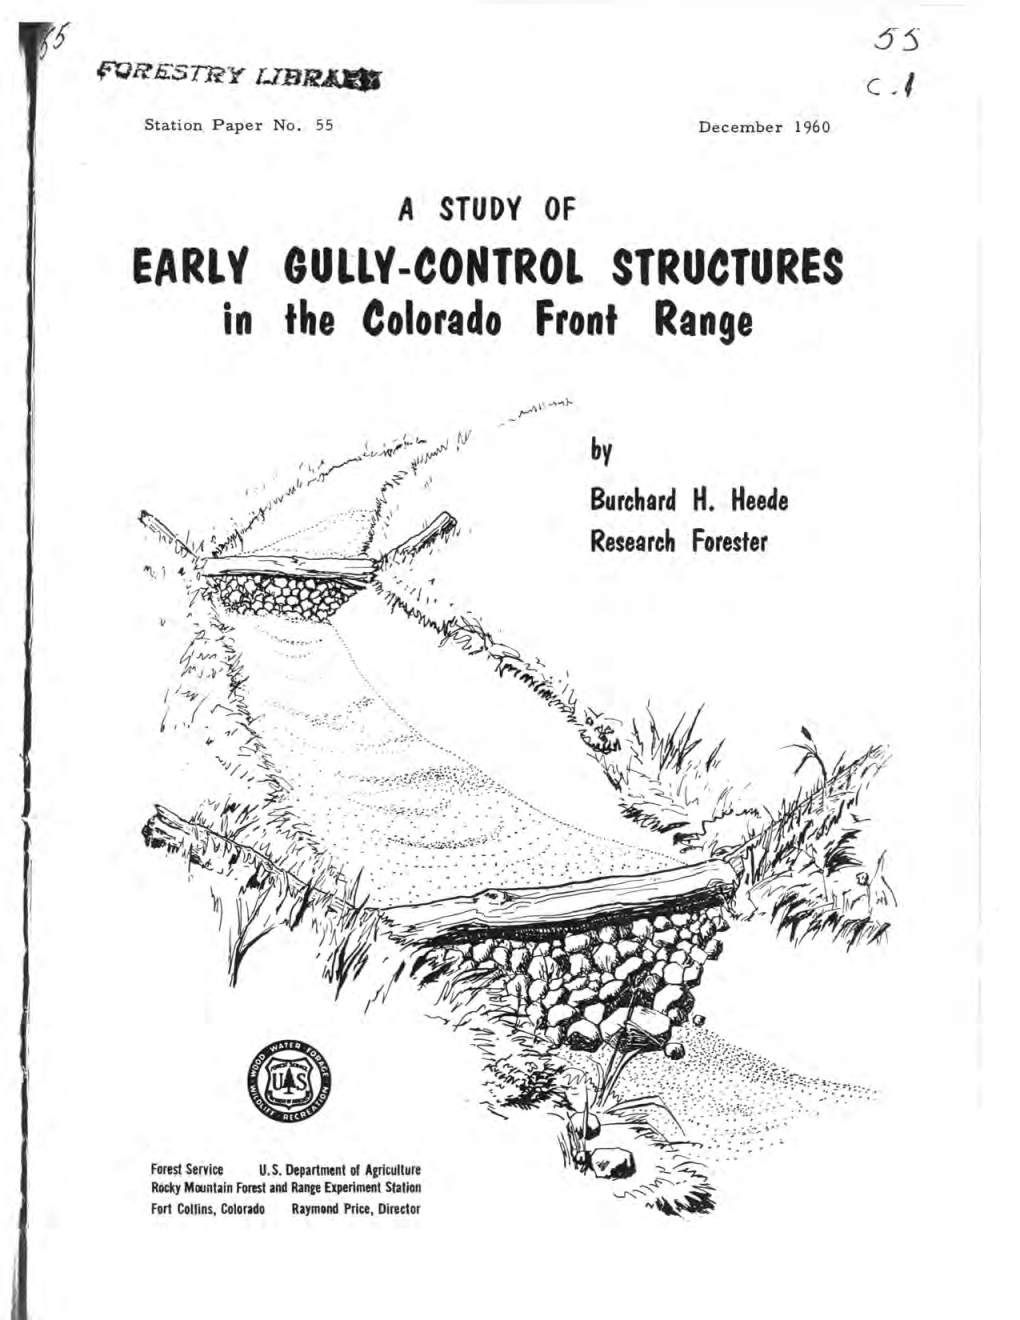 EARLY GULLY-CONTROL STRUCTURES in the Colorado Front Range